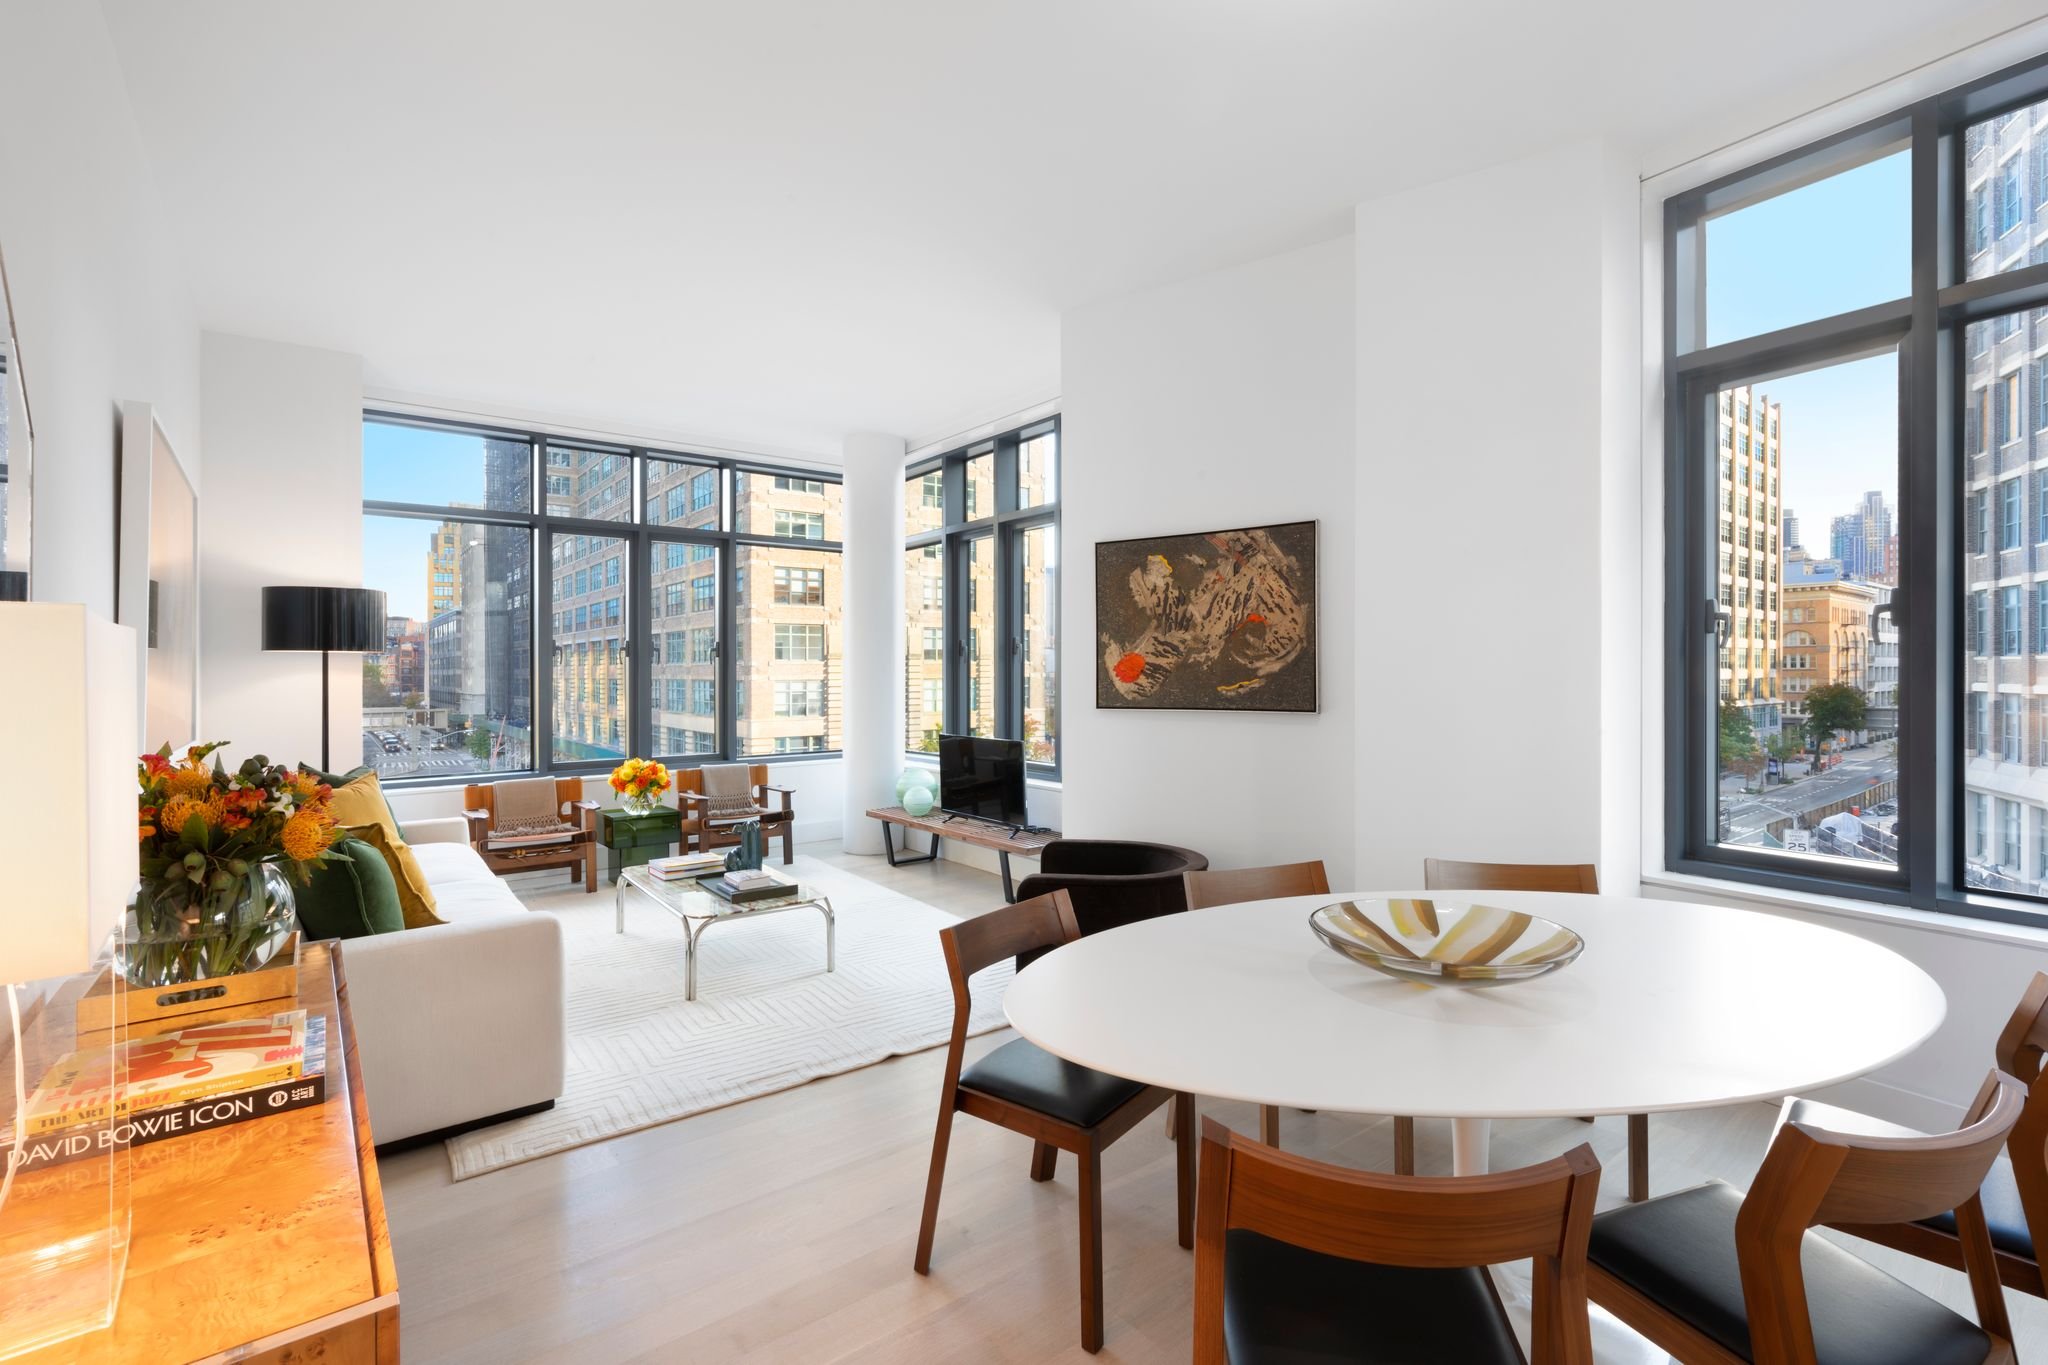  Pricing ranges from two-bedrooms starting at $2.895 million and penthouses range from $6 million and up. Sales have commenced and there are model units on site. Excepted date of occupancy is second quarter of 2022. 